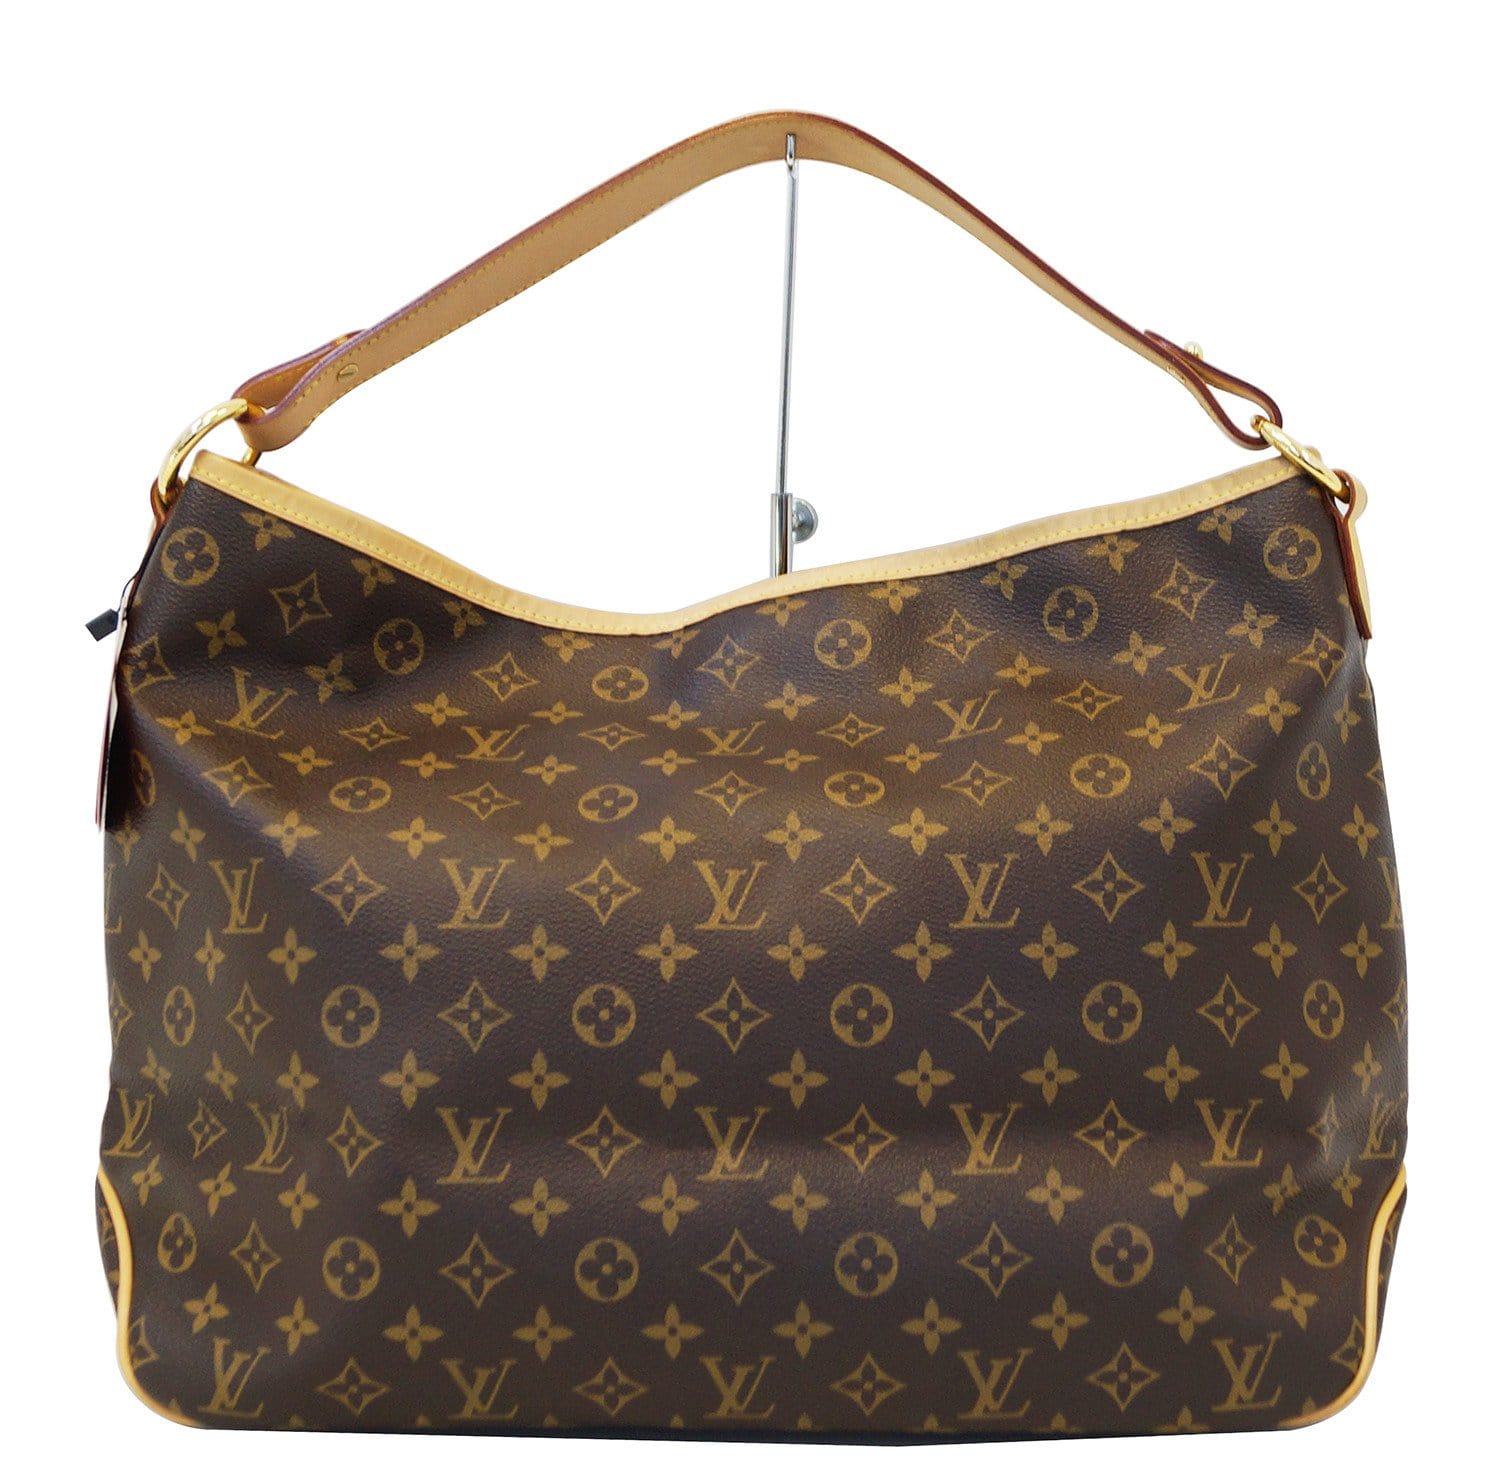 Louis Vuitton Pre-owned Women's Shoulder Bag - Brown - One Size